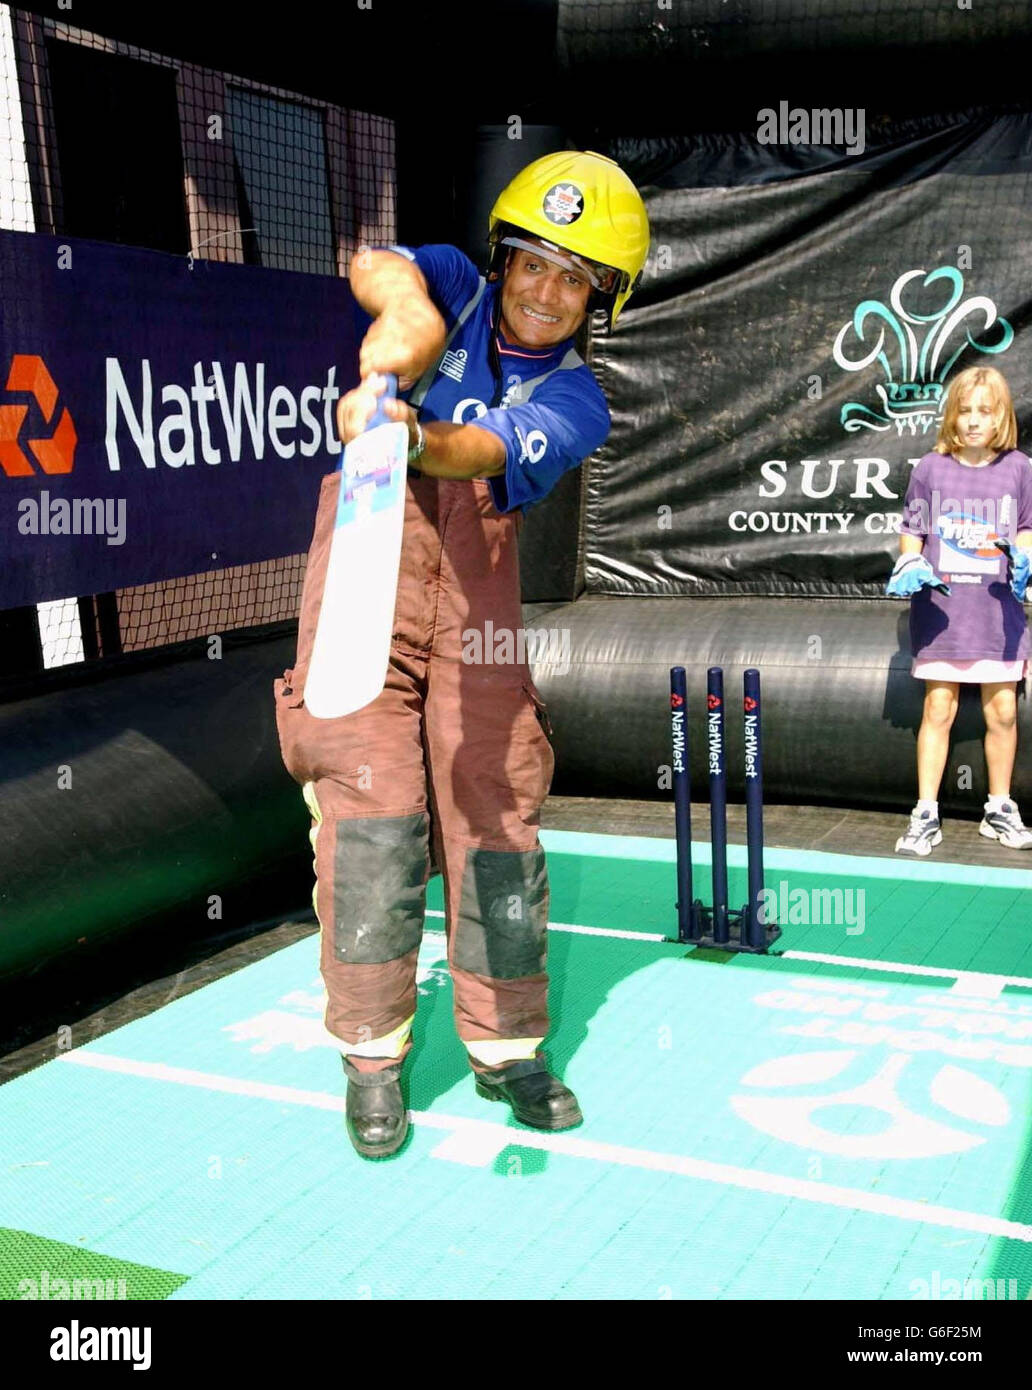 England and Surrey cricketer Mark Butcher joins local children at Croydon Fire Station to mark the launch of the NatWest Inter Cricket Summer Schools programme. This four day Summer School gives youngsters the chance to learn about Inter Cricket and develop new skills to improve their game under the expert guidance and tuition of Surrey County Cricket Club coaches. Stock Photo